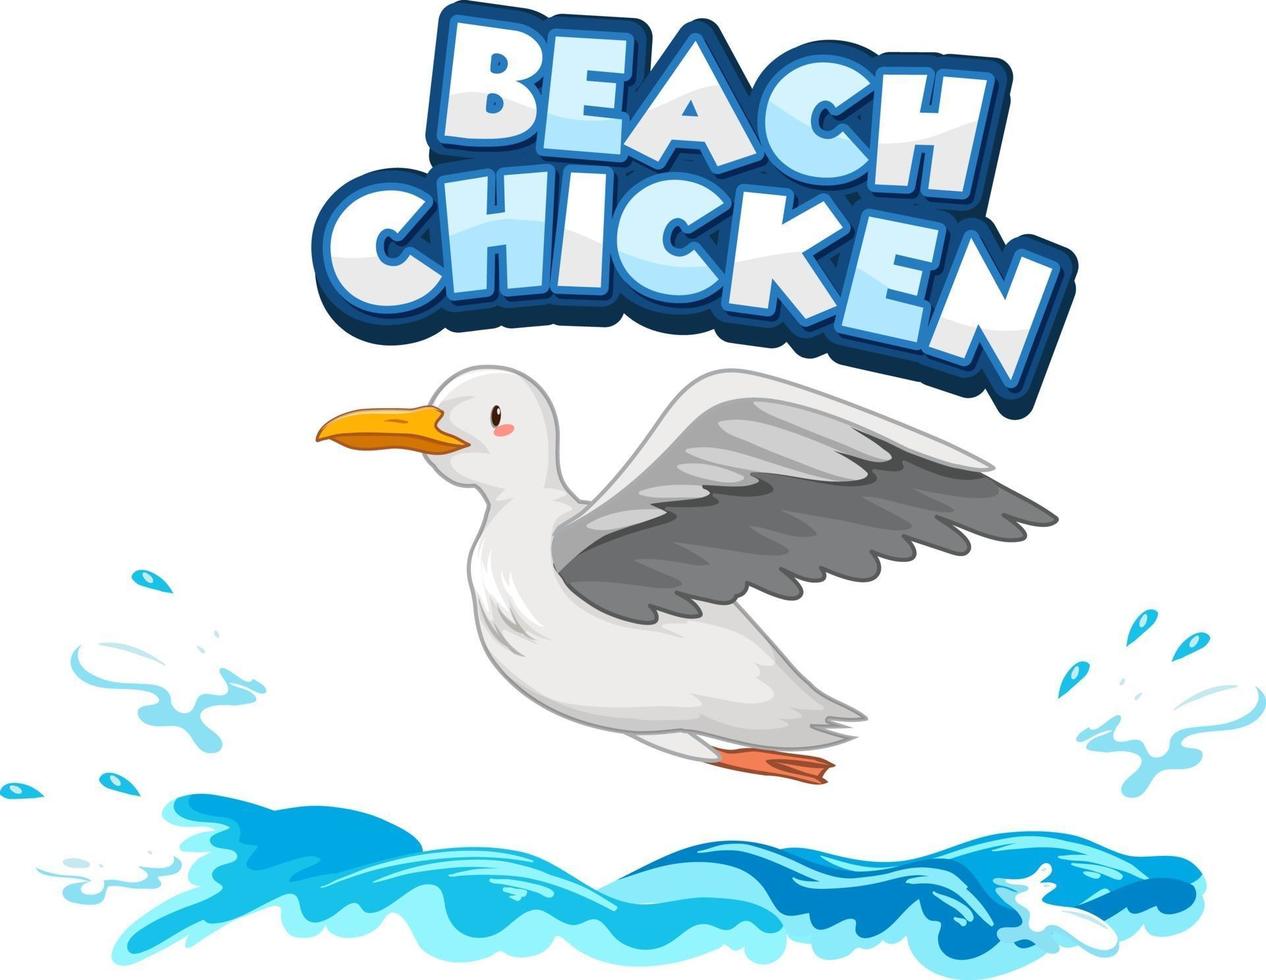 Seagull bird cartoon character with Beach Chicken font banner isolated vector